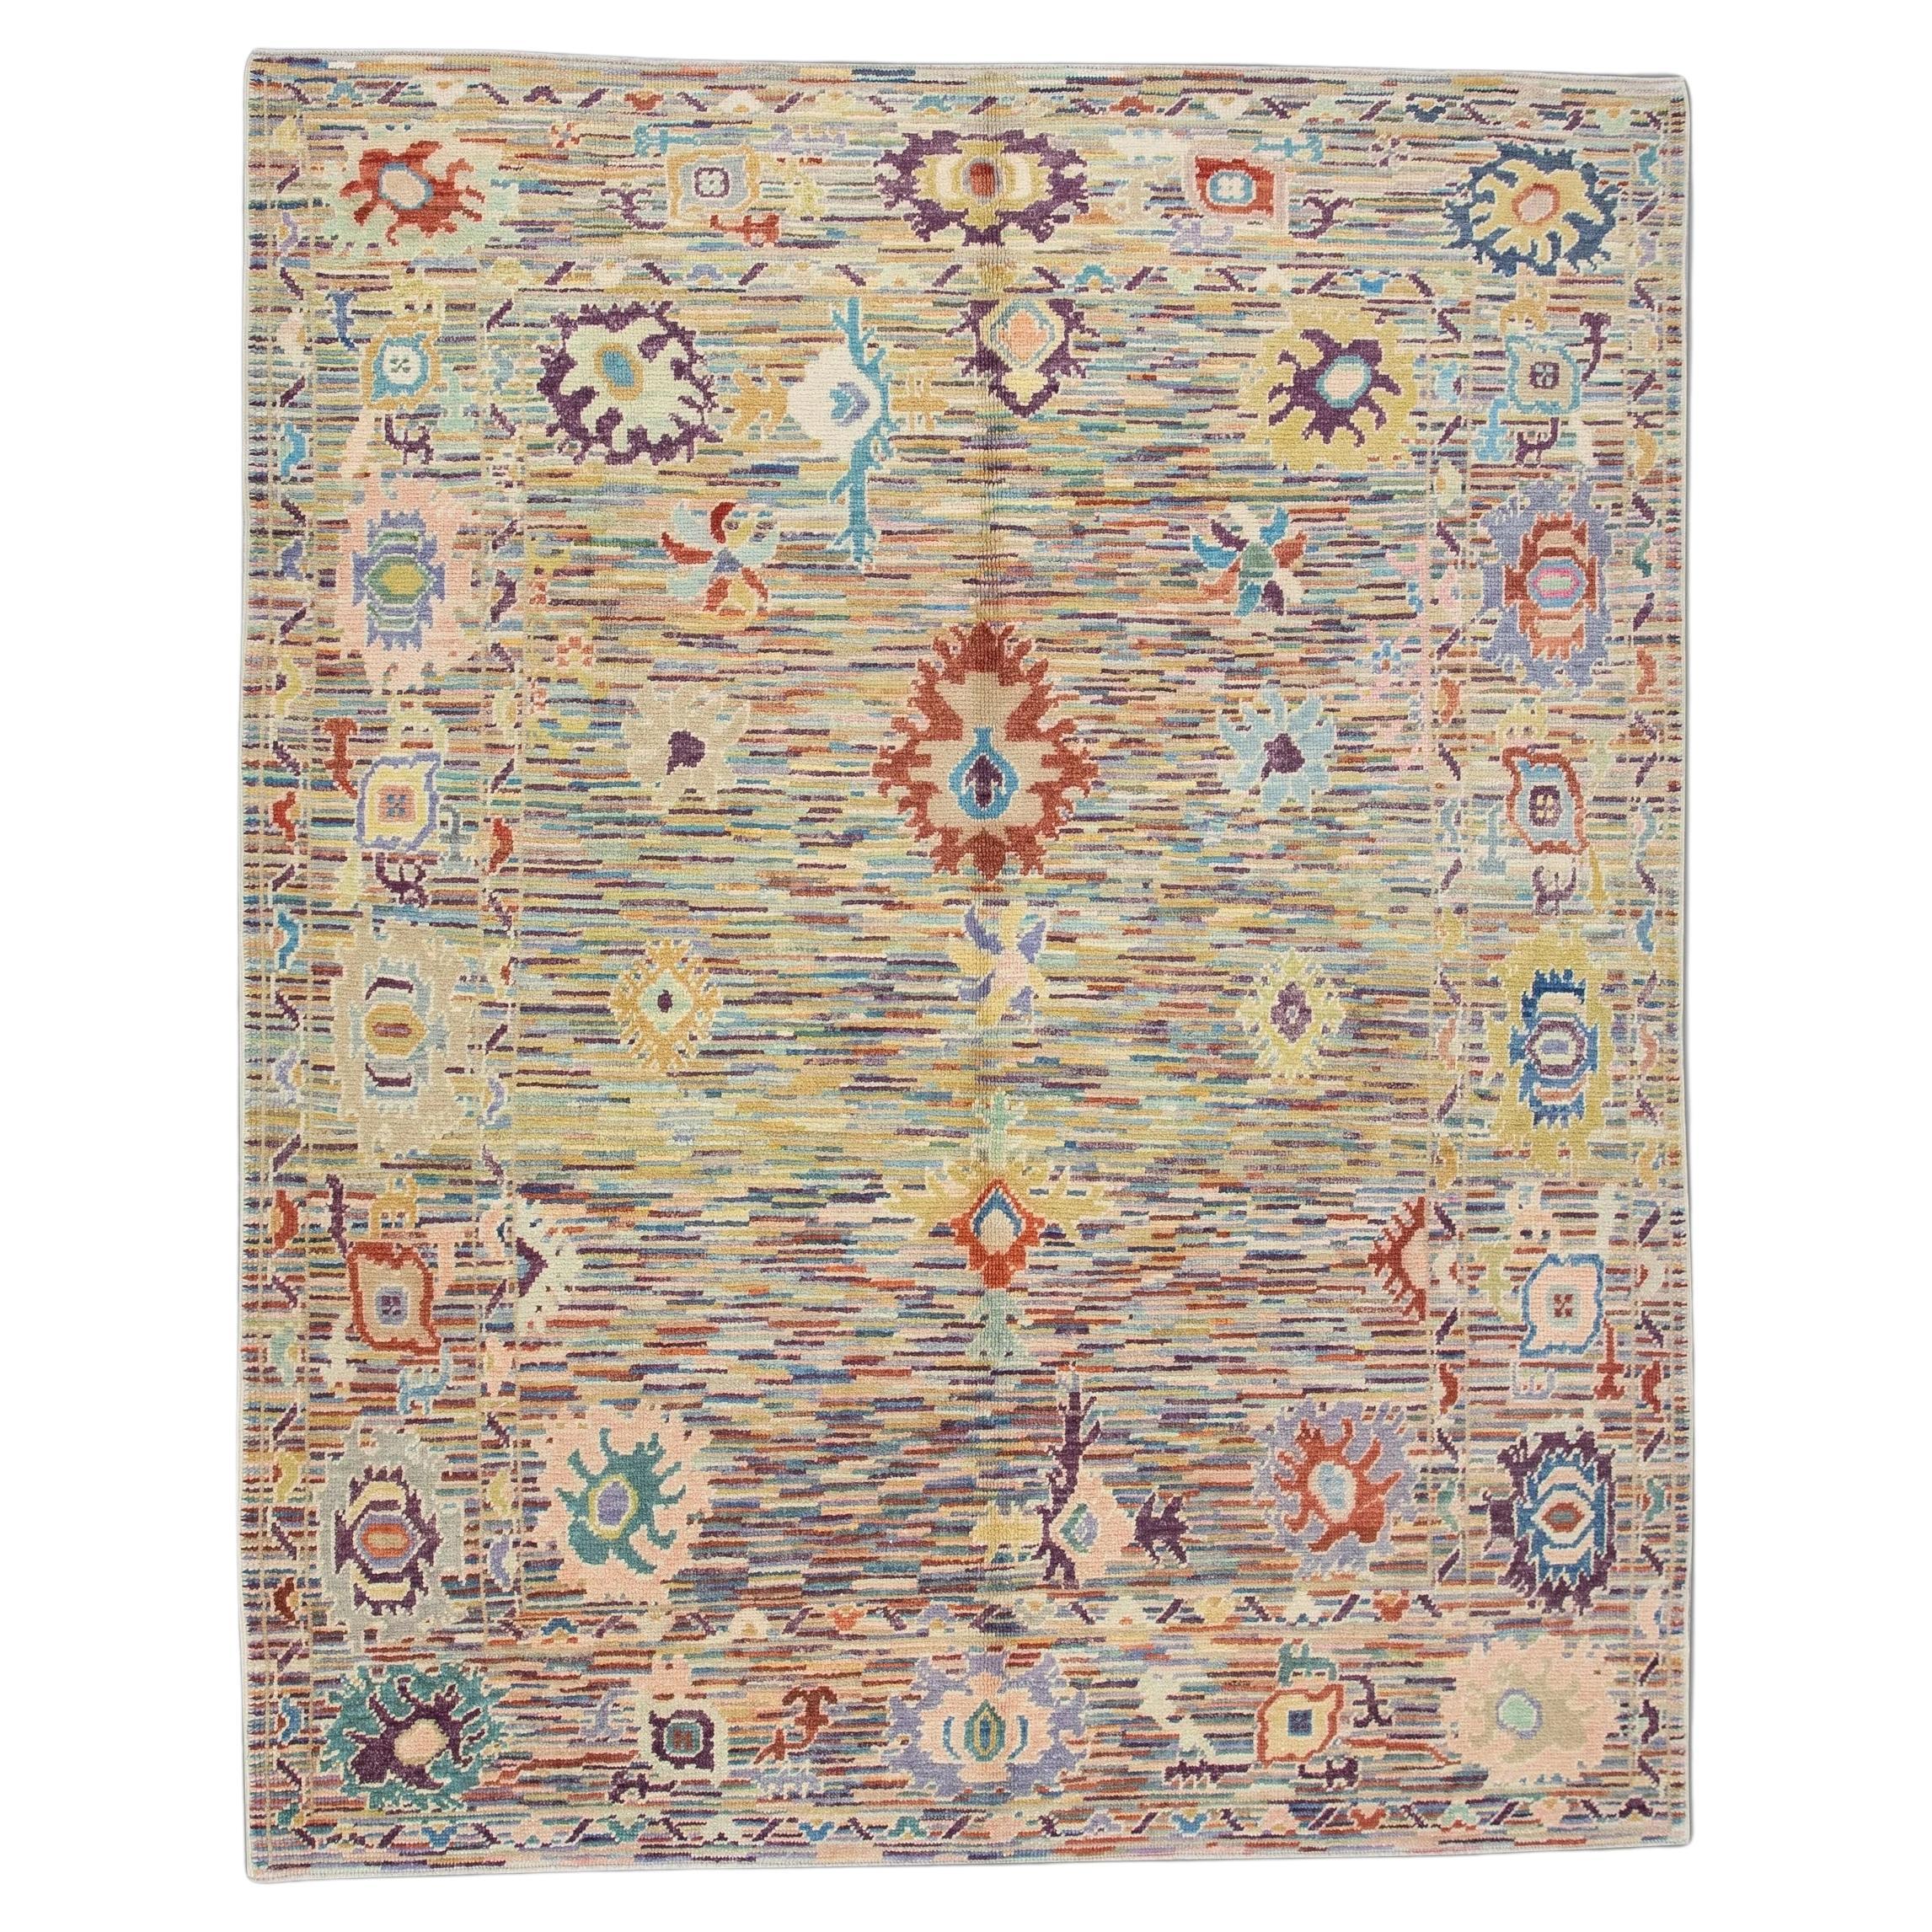 Handwoven Wool Turkish Oushak Rug in Colorful Geometric Floral Design 8' x 10'1"